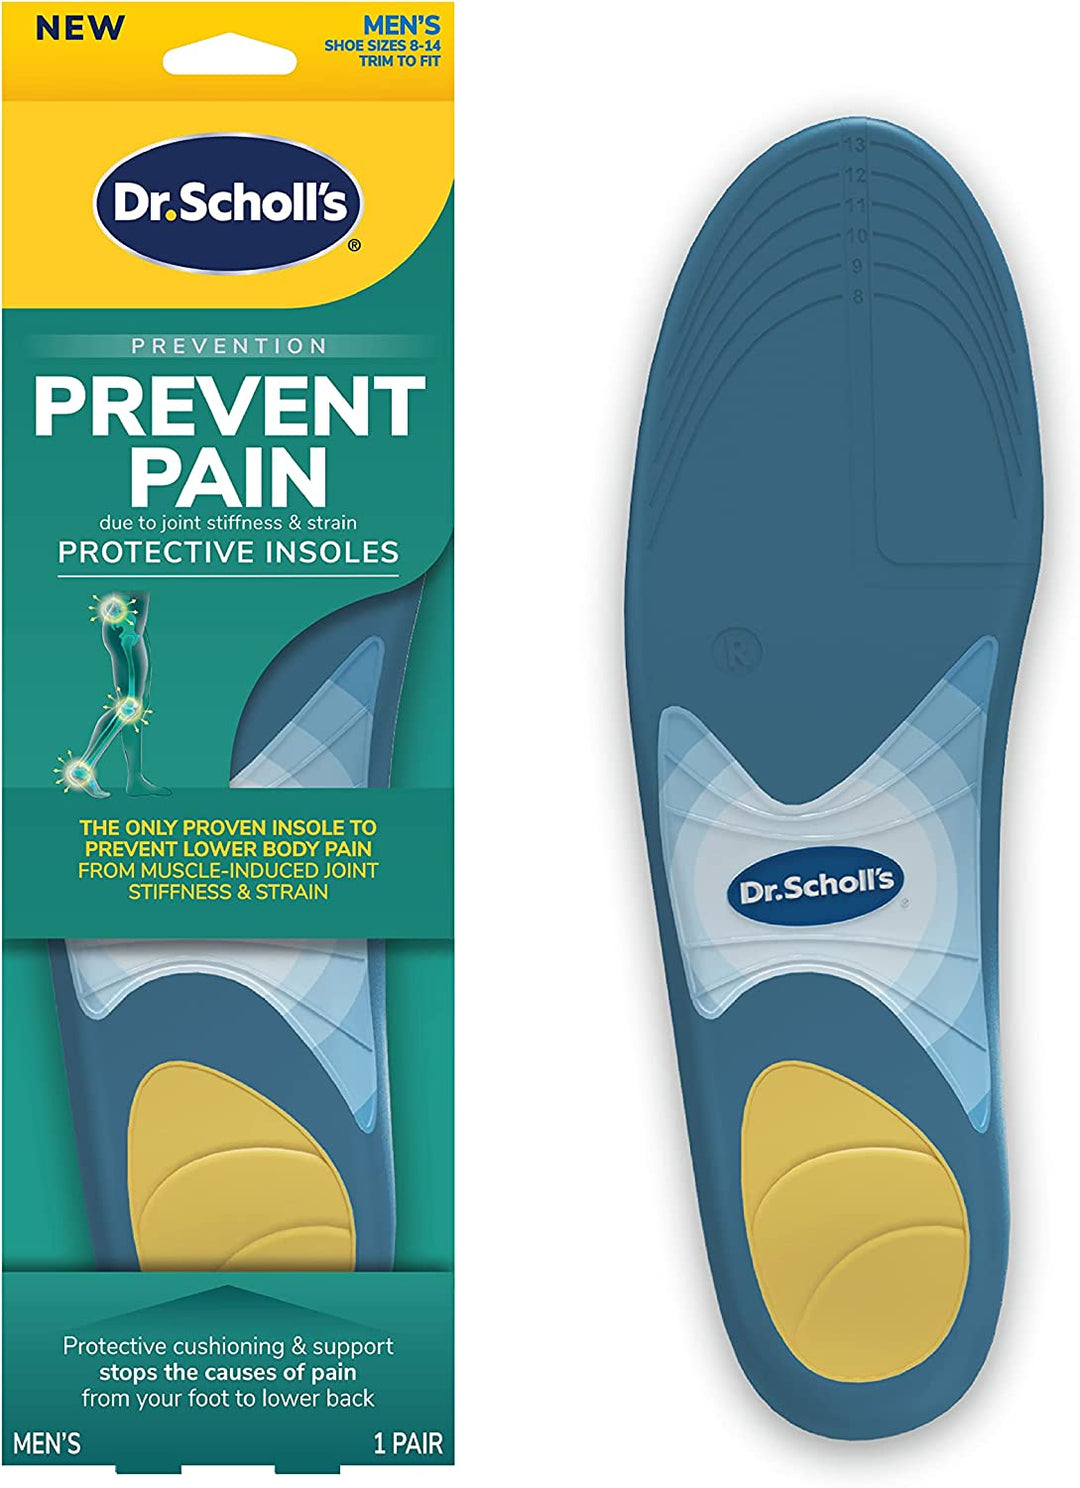 Dr. Scholl's Prevent Pain Lower Body Protective Insoles, 1 Pair